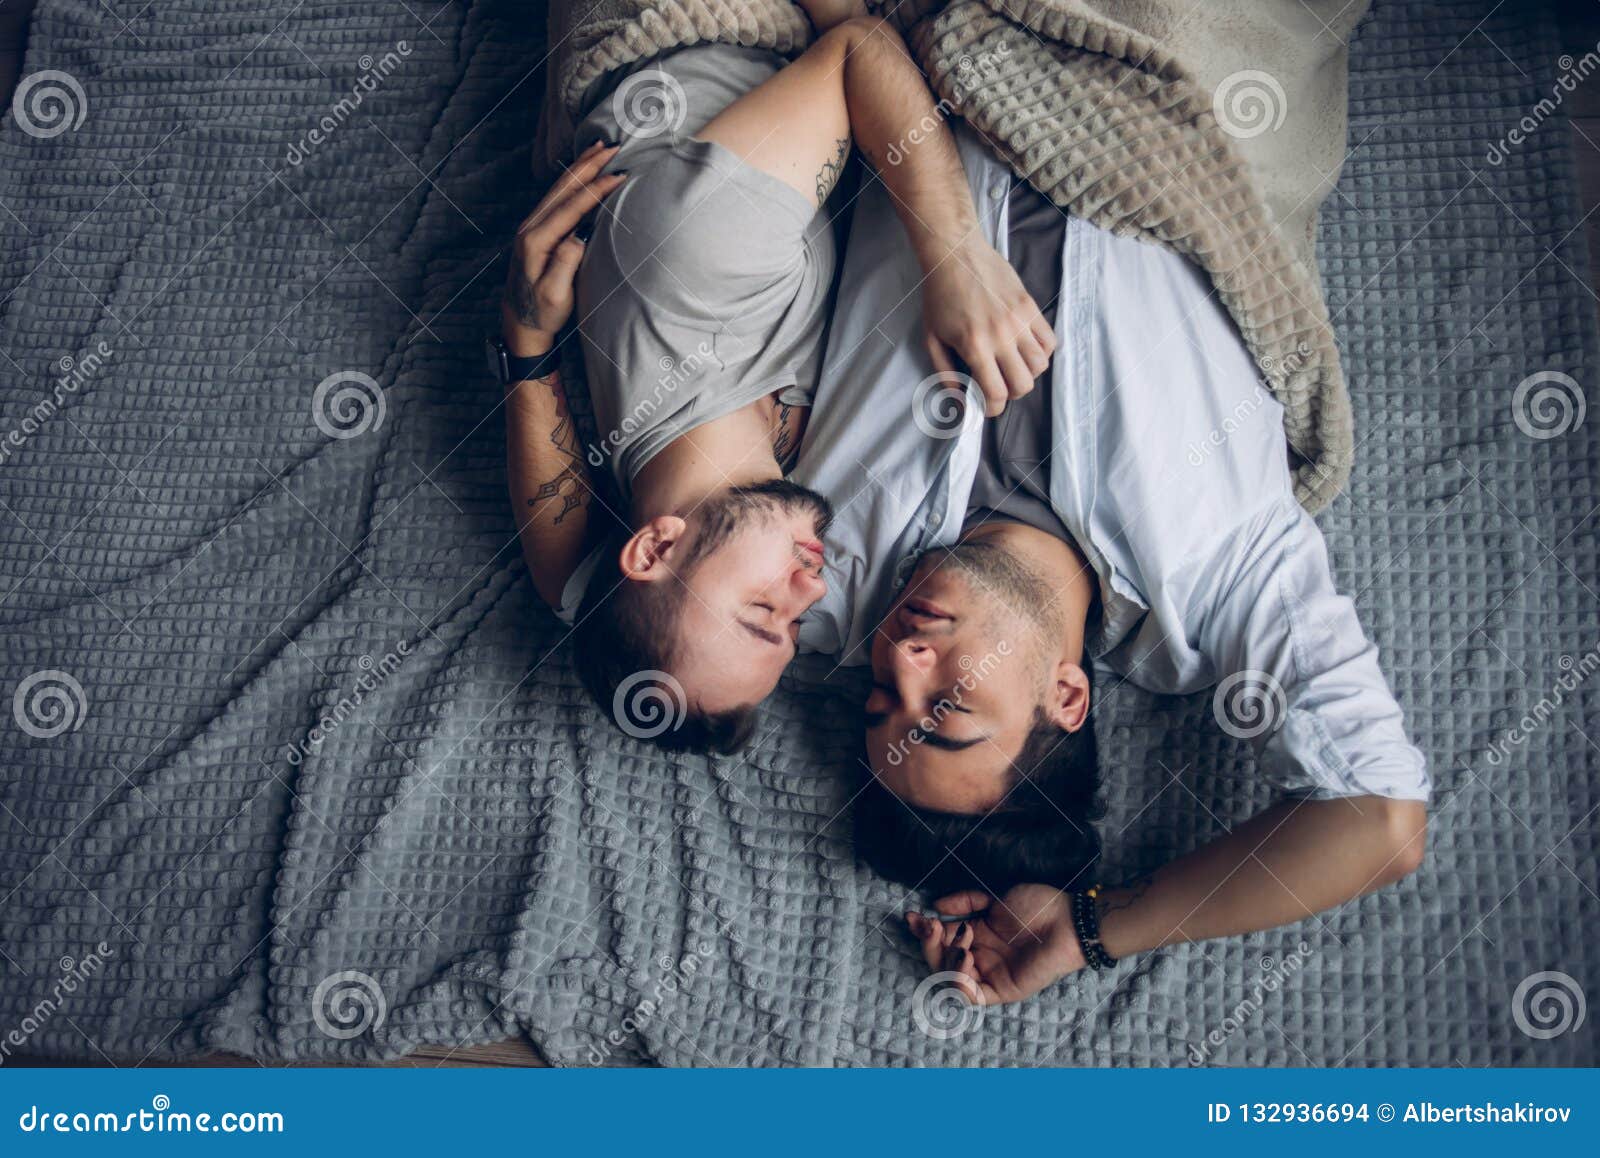 Handsome Sleepy Man with Bristle Kissing Good Night Male Partner Lying in Bed Stock Photo photo